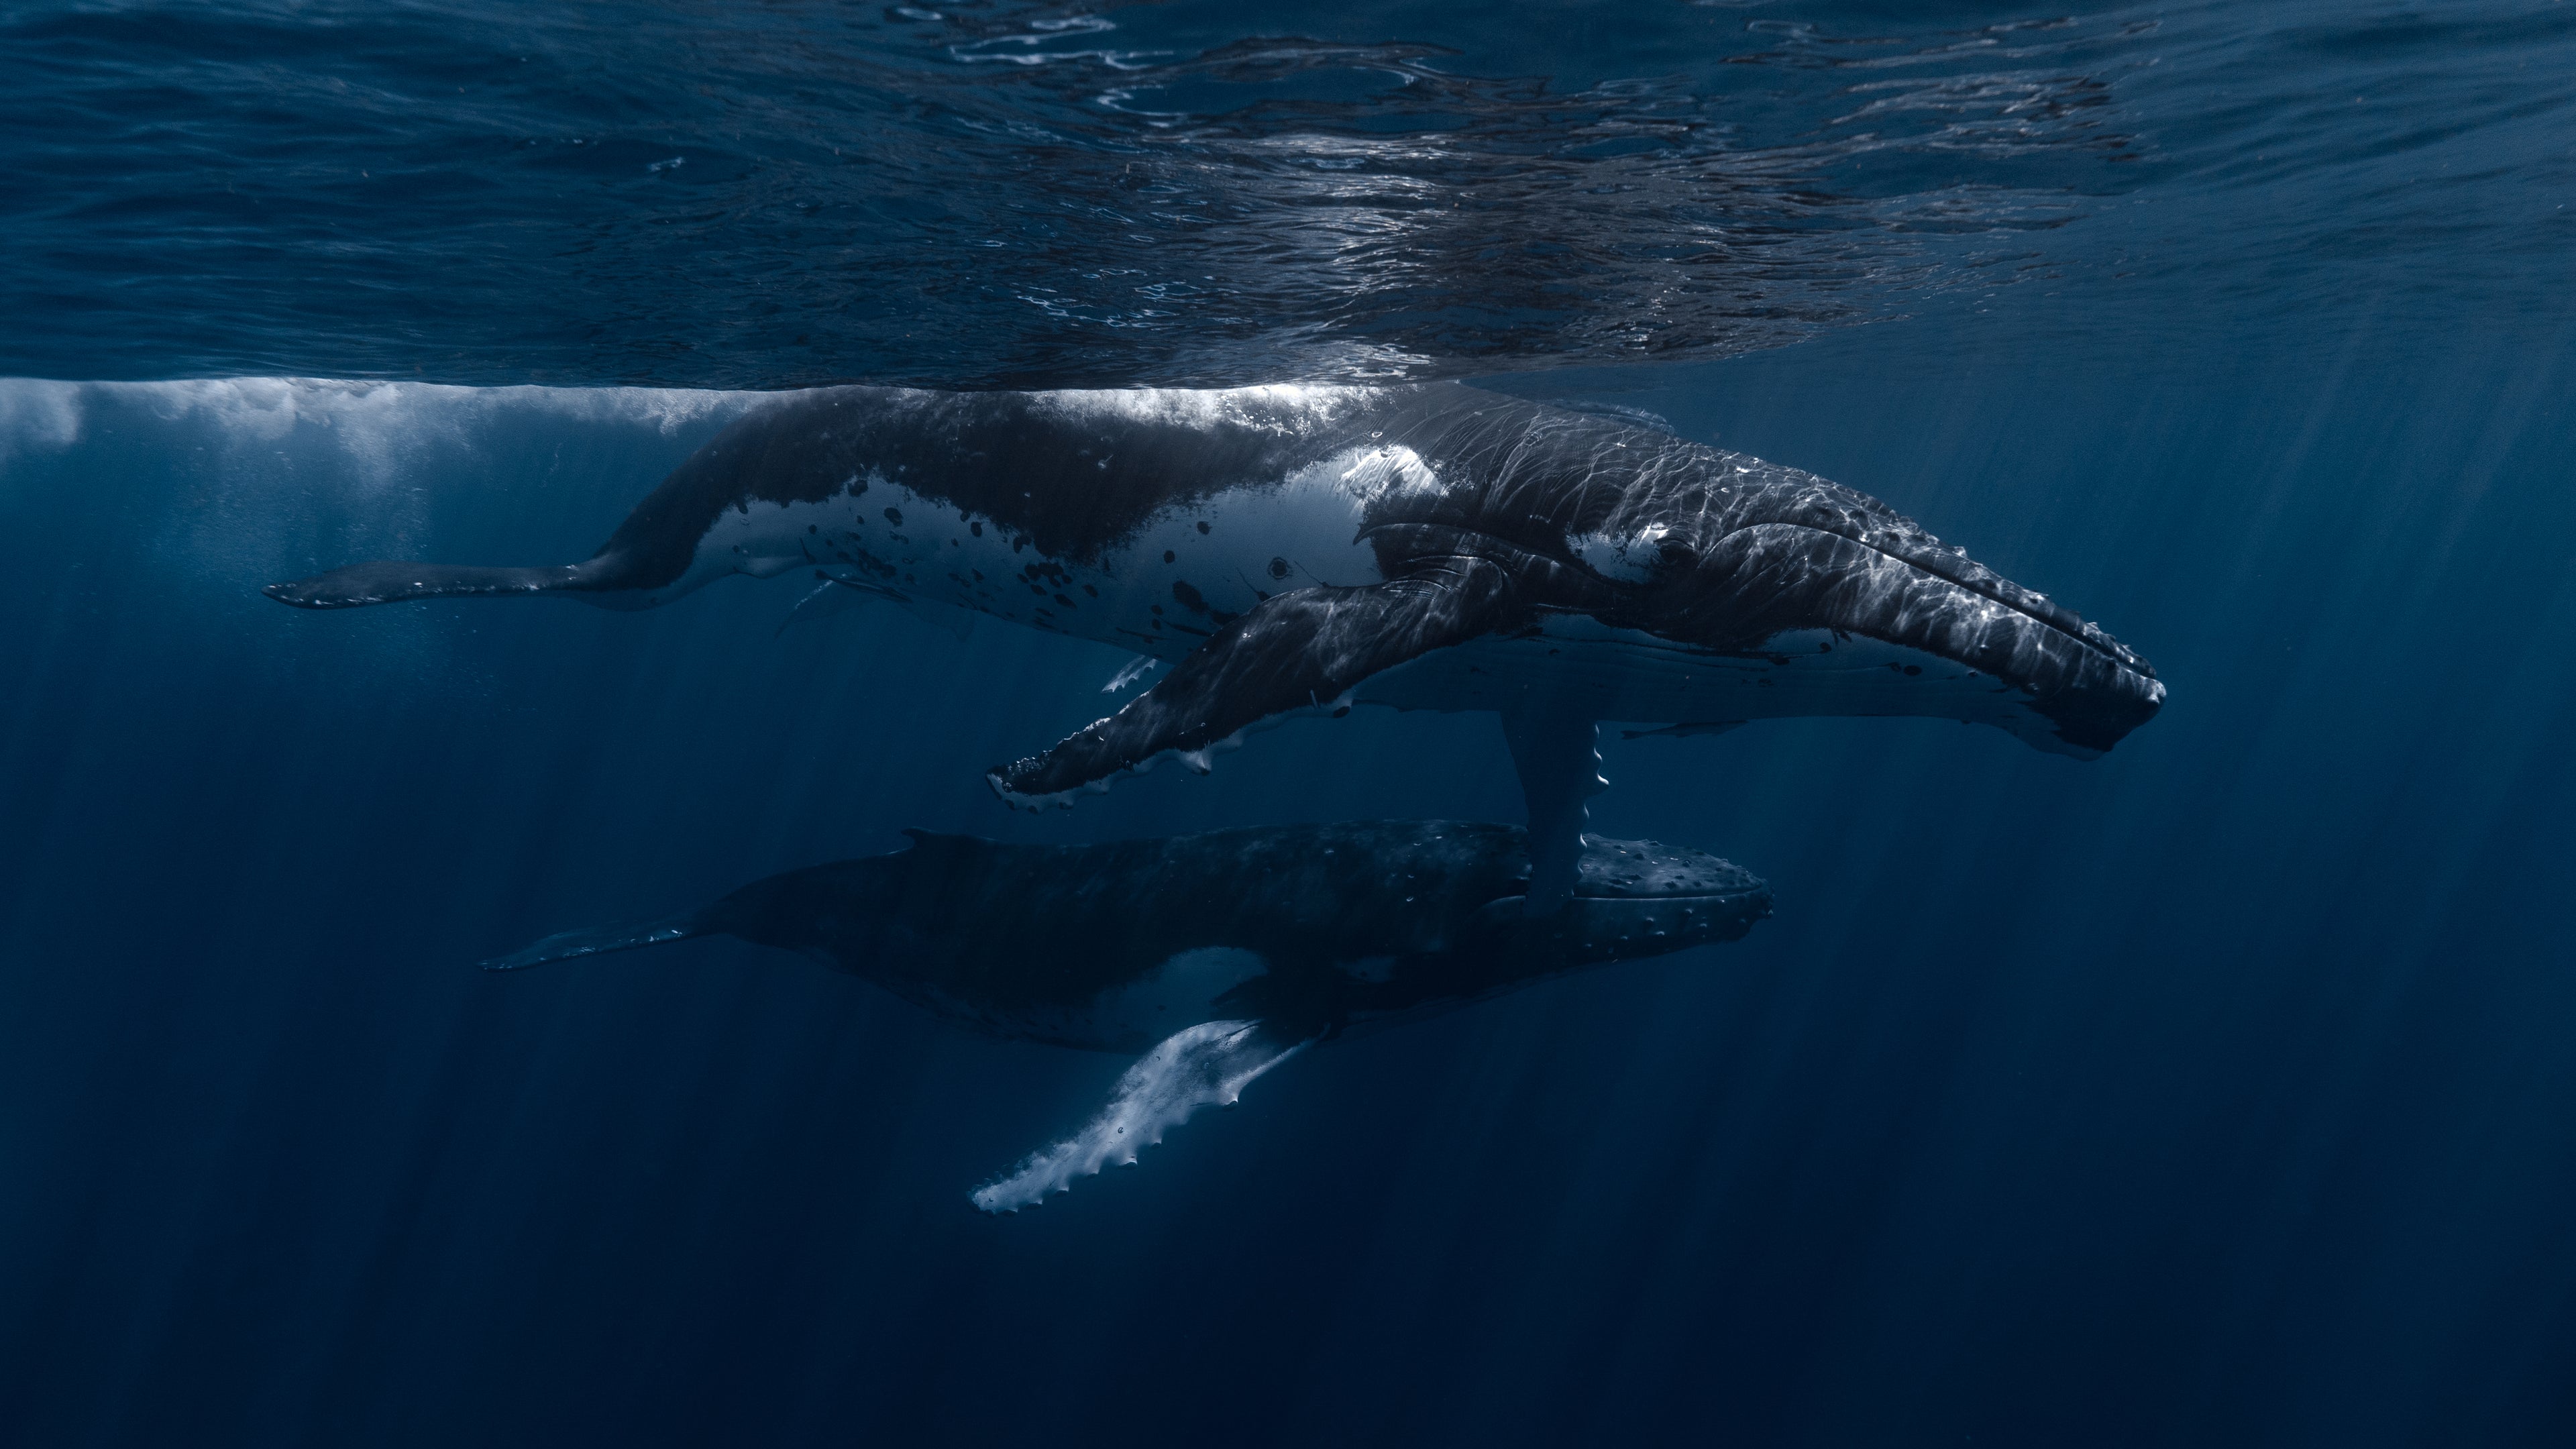 two humpback whales pictured during heat run in the pacific ocean